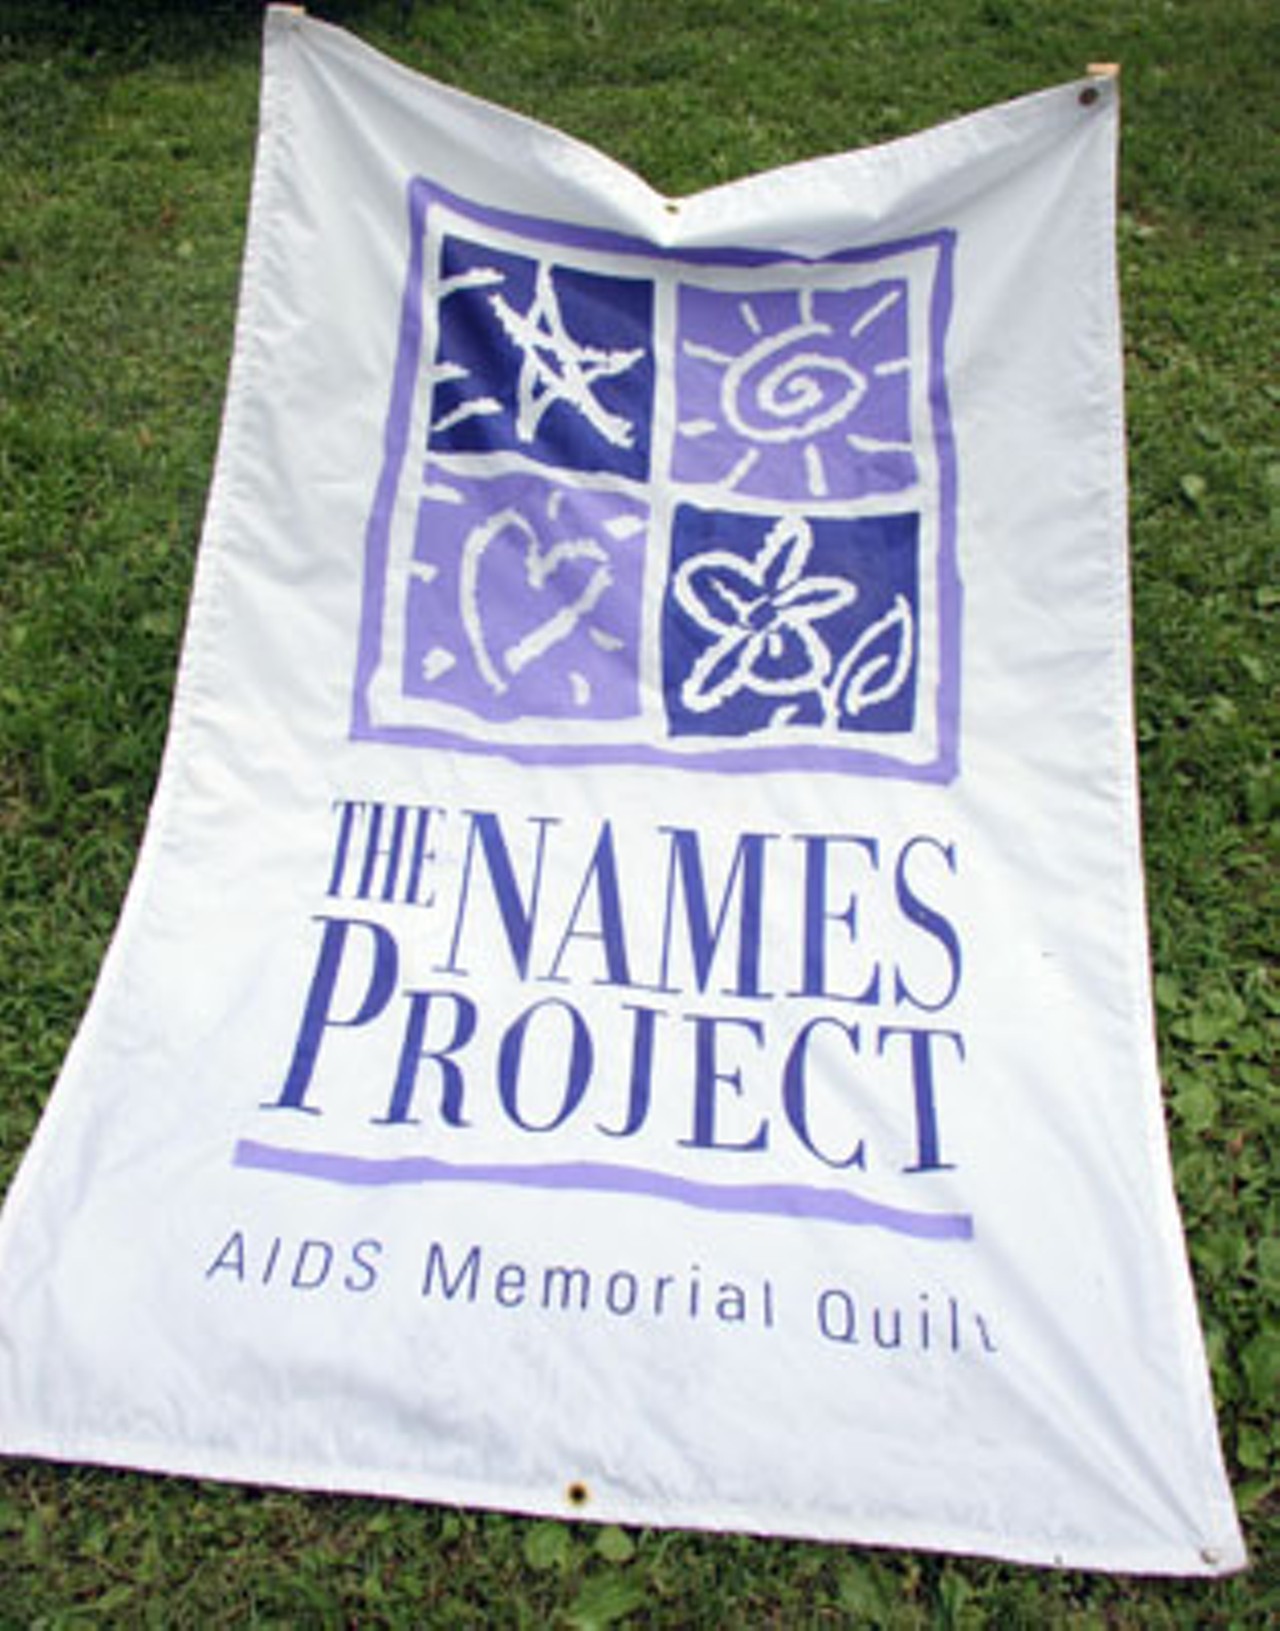 The Names Project -- An organization that uses the AIDS Memorial Quilt to bring an end to AIDS -- had a large, roped-off area for people to visit.